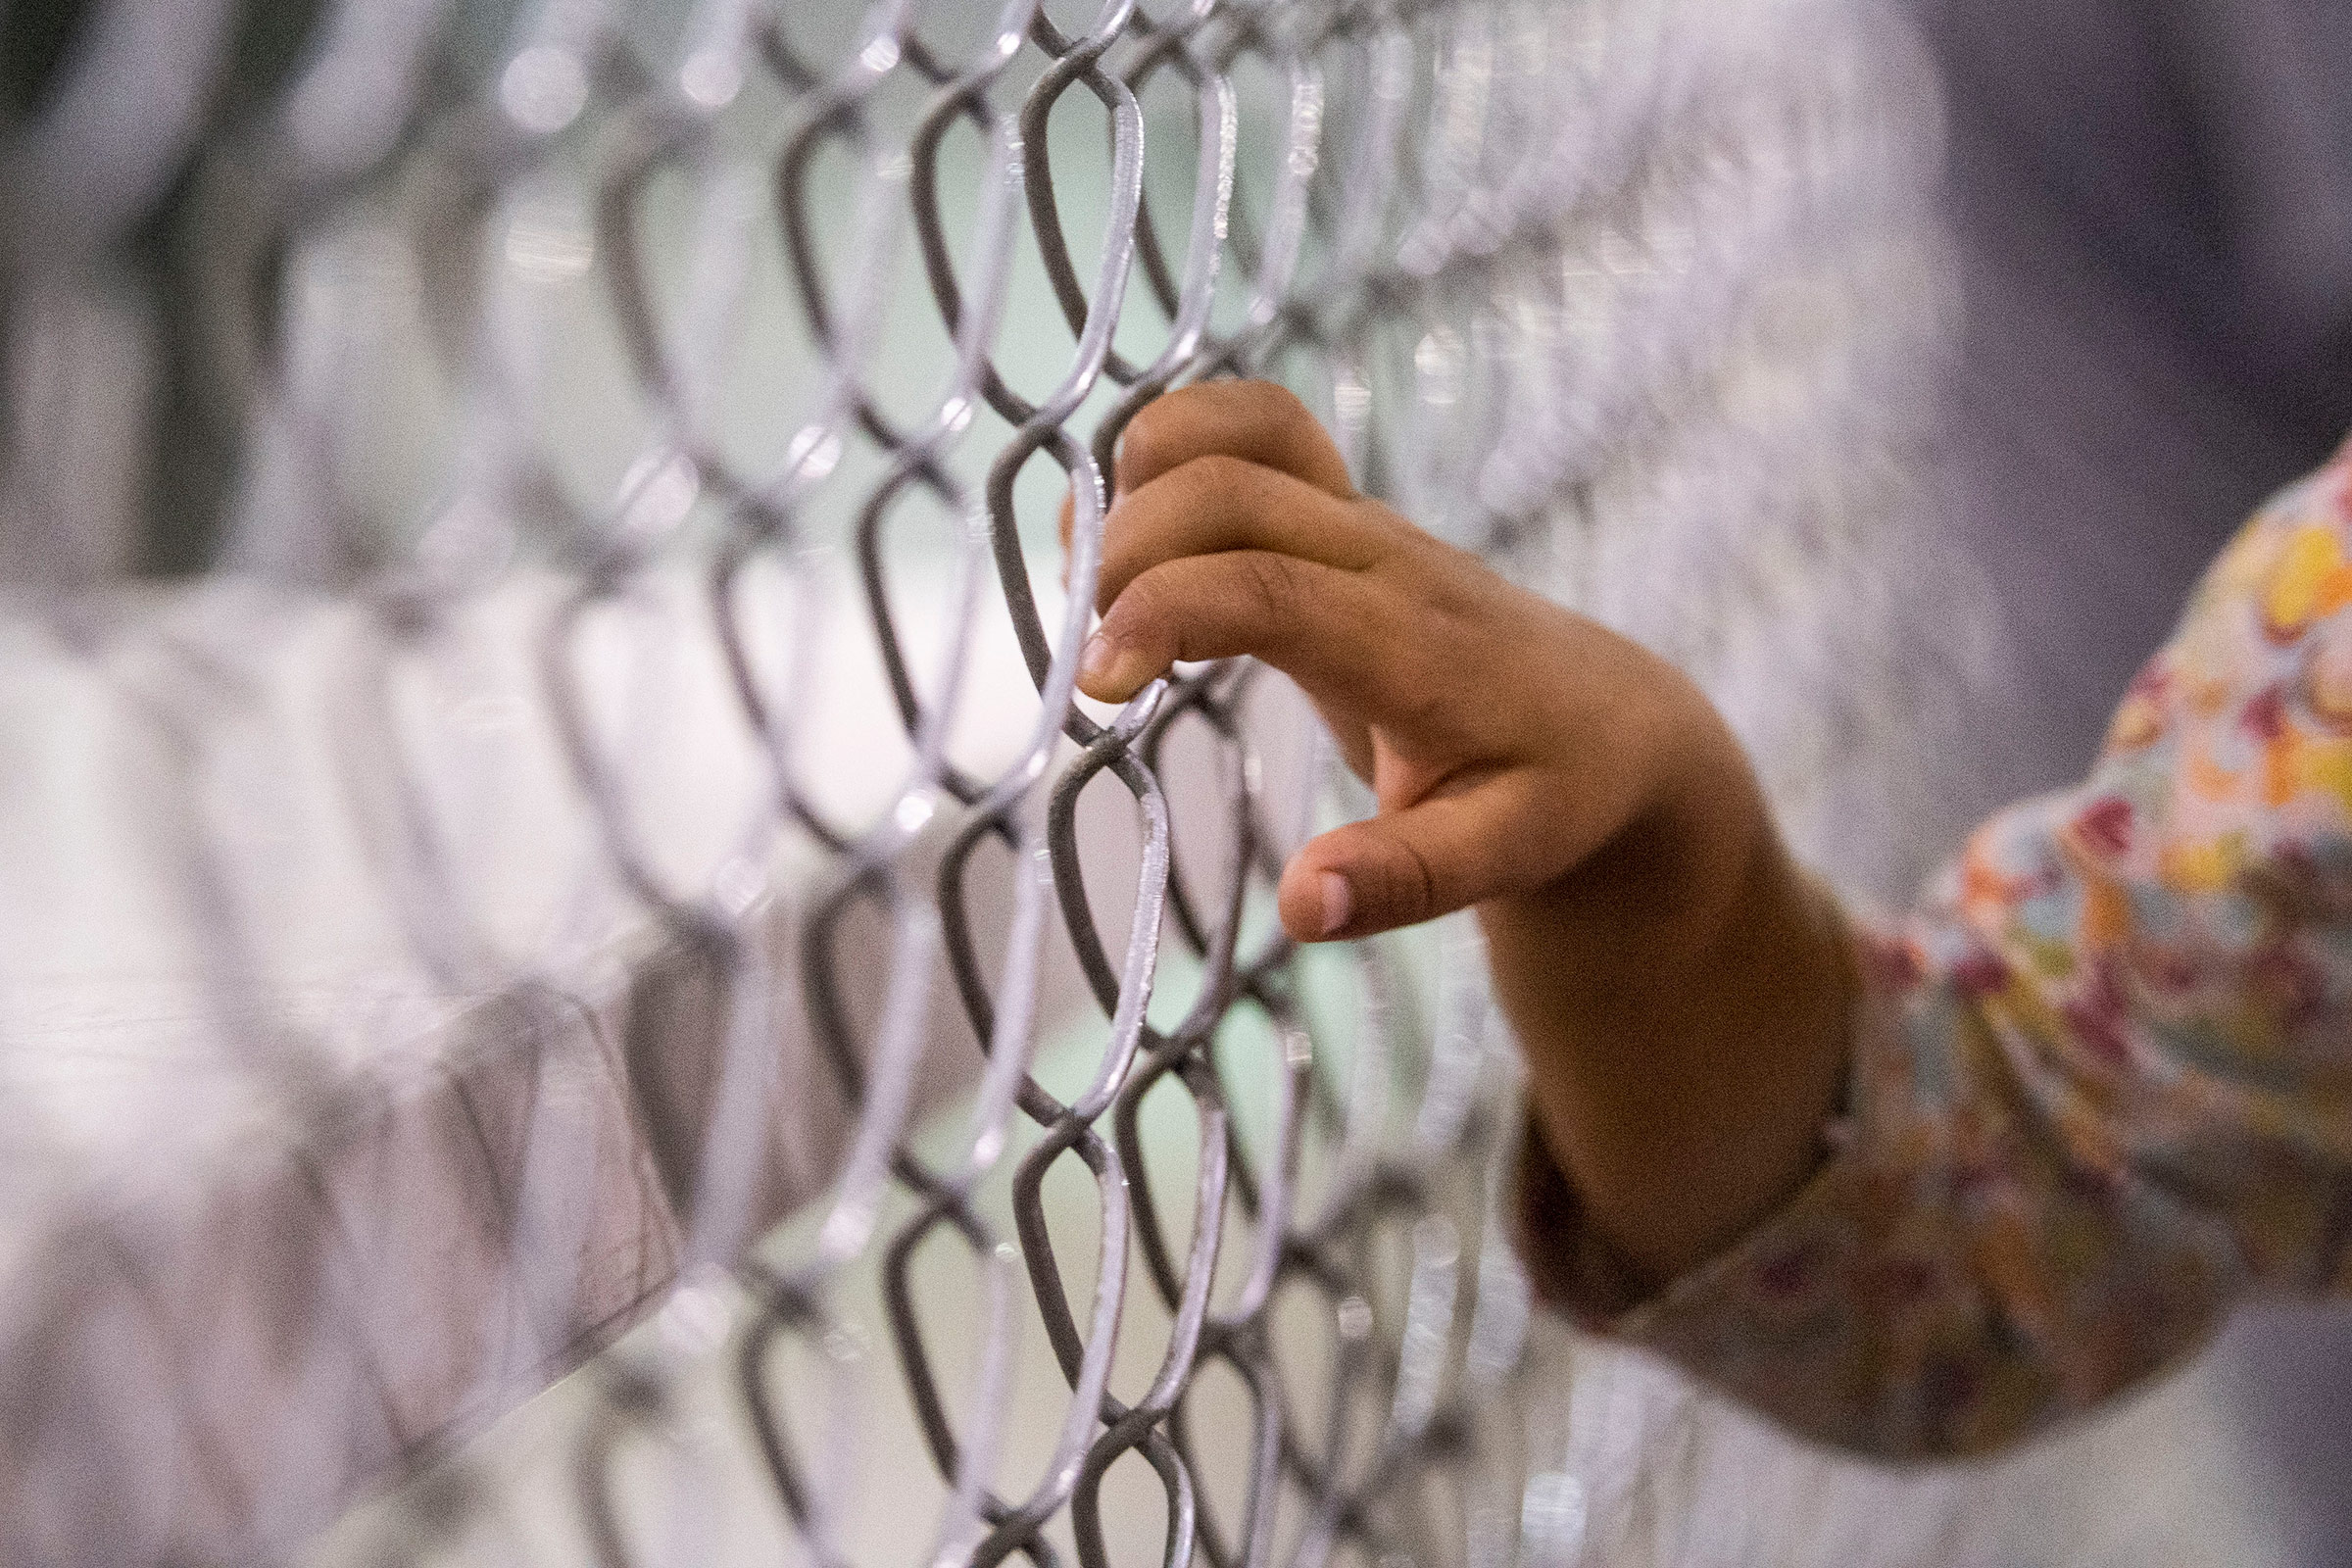 A child holds onto a fence in the U.S. Border Patrol Central Processing Center in McAllen, Texas, on Aug. 12, 2019. (Carolyn Van Houten—The Washington Post/Getty Images)